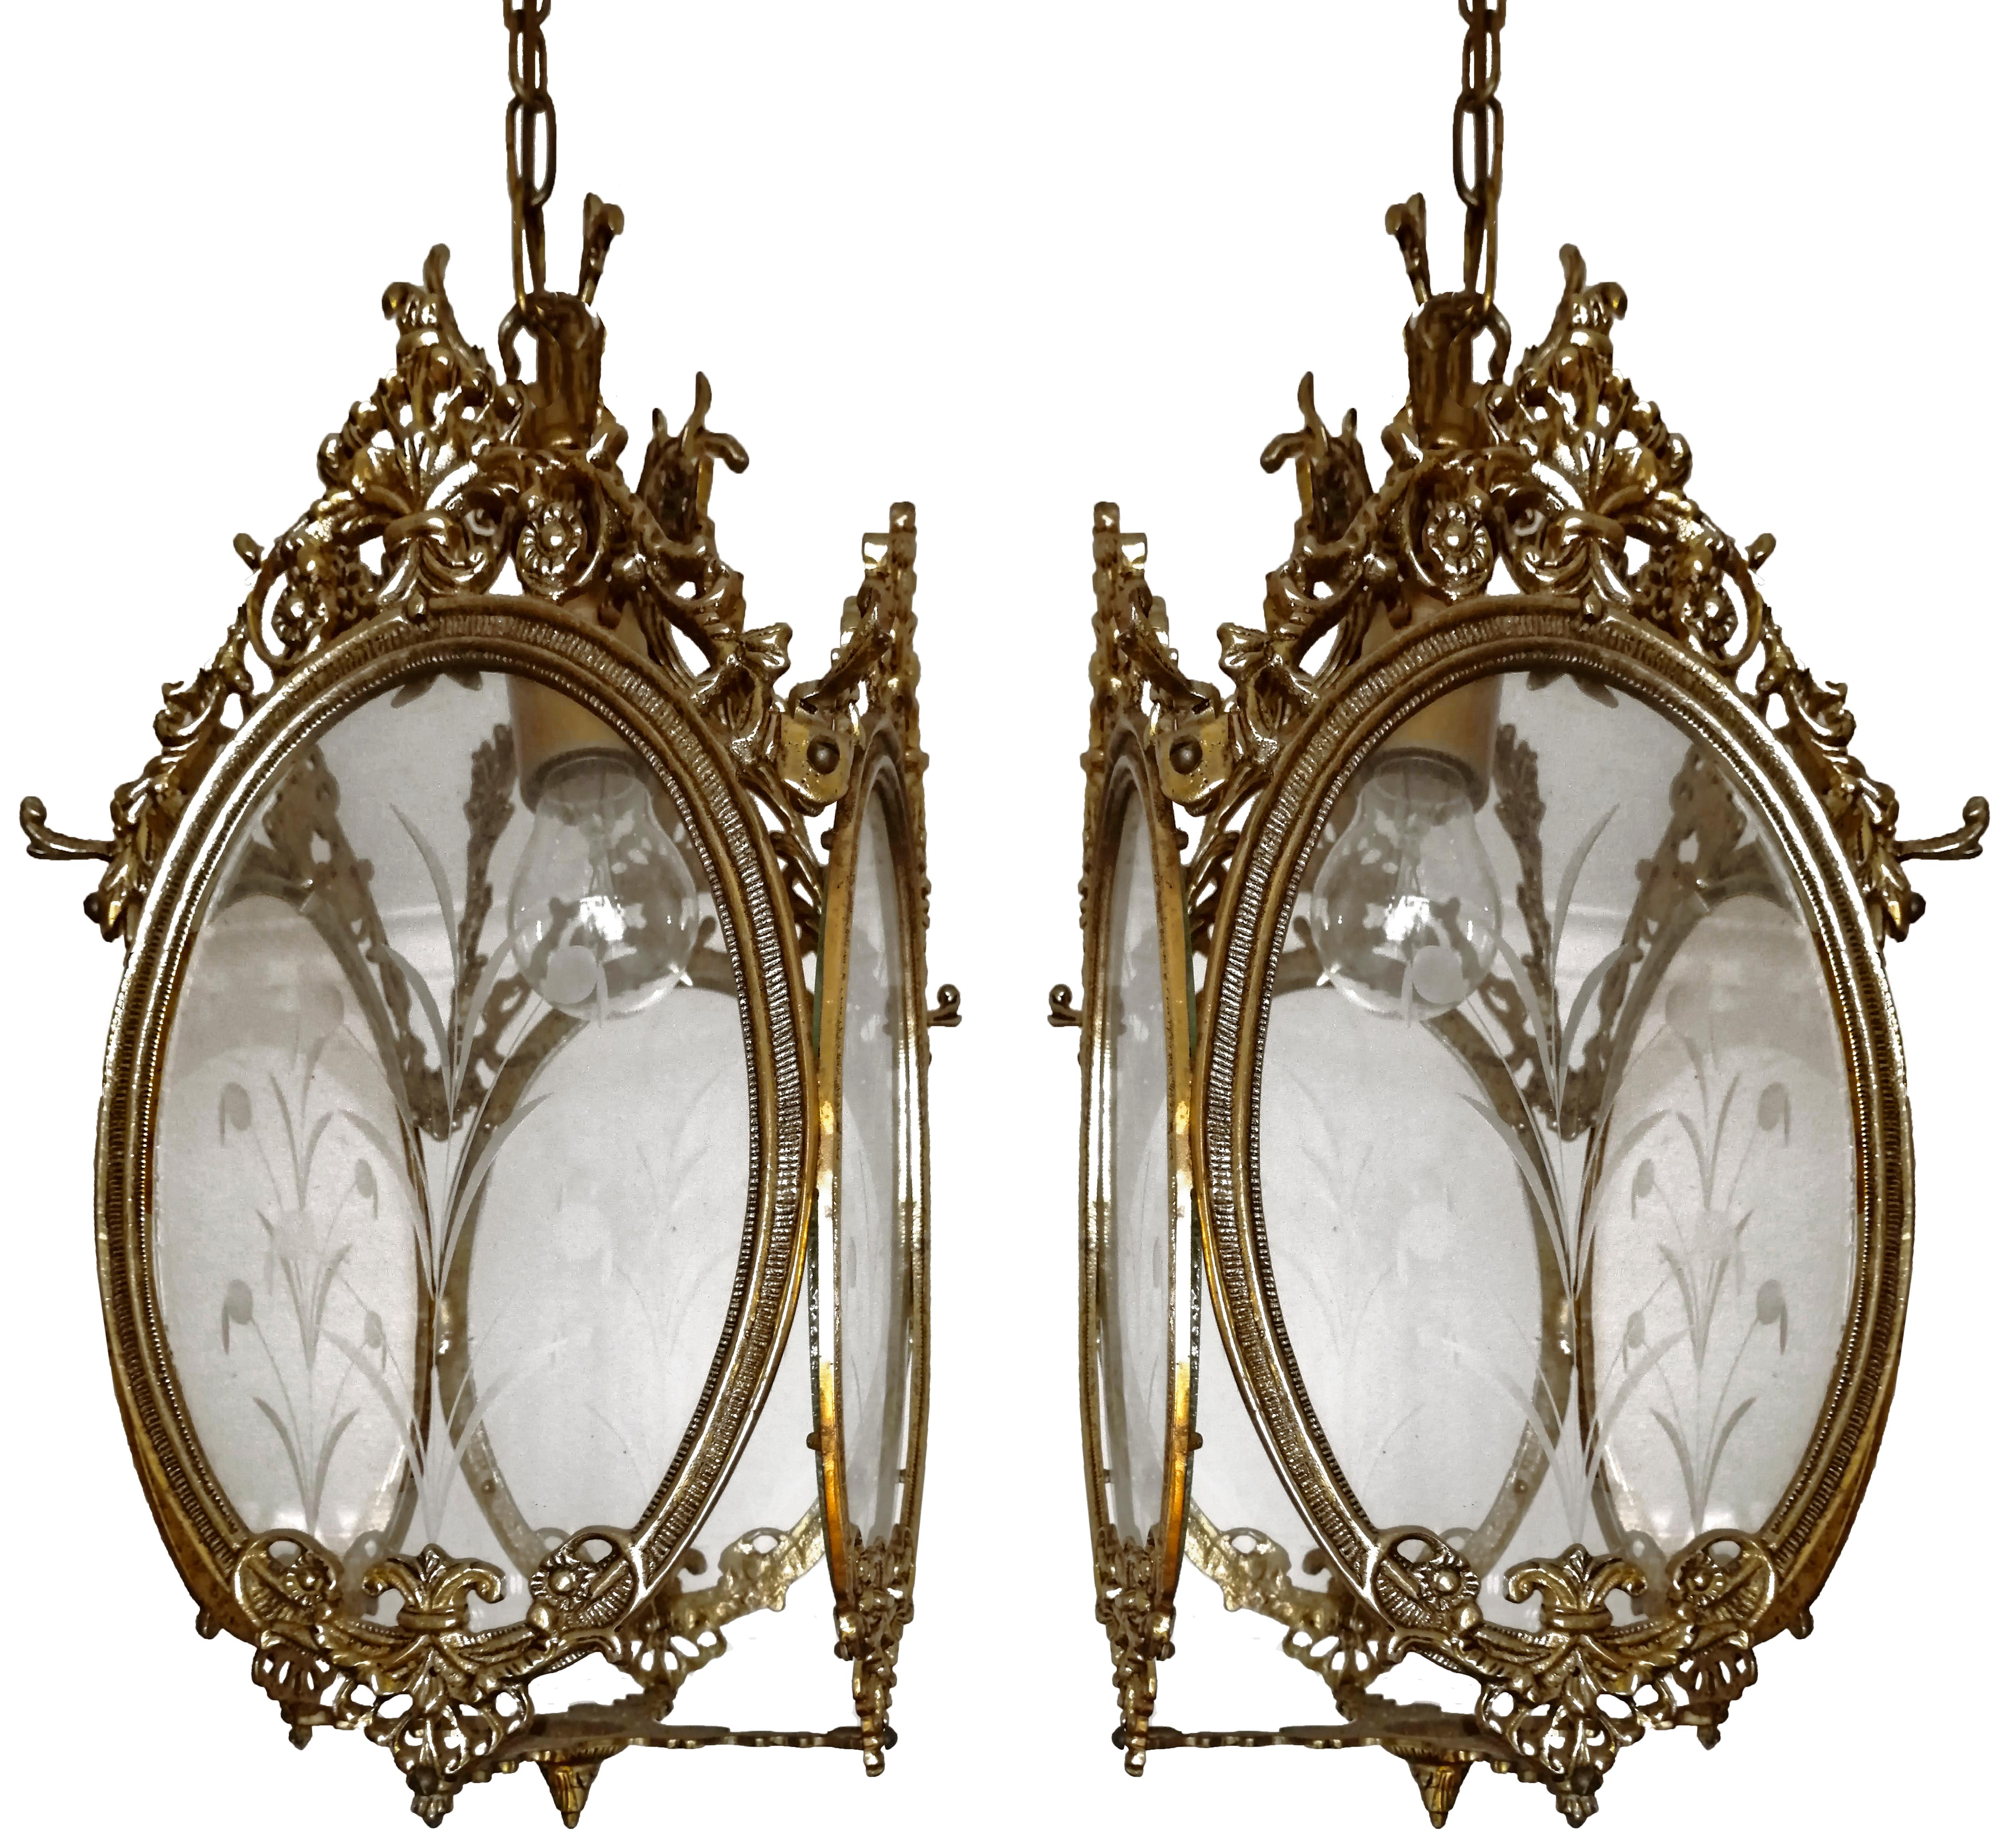 Art Deco Pair of Antique Louis XVI French Lanterns Chandeliers in Gilt Bronze & Cut Glass For Sale